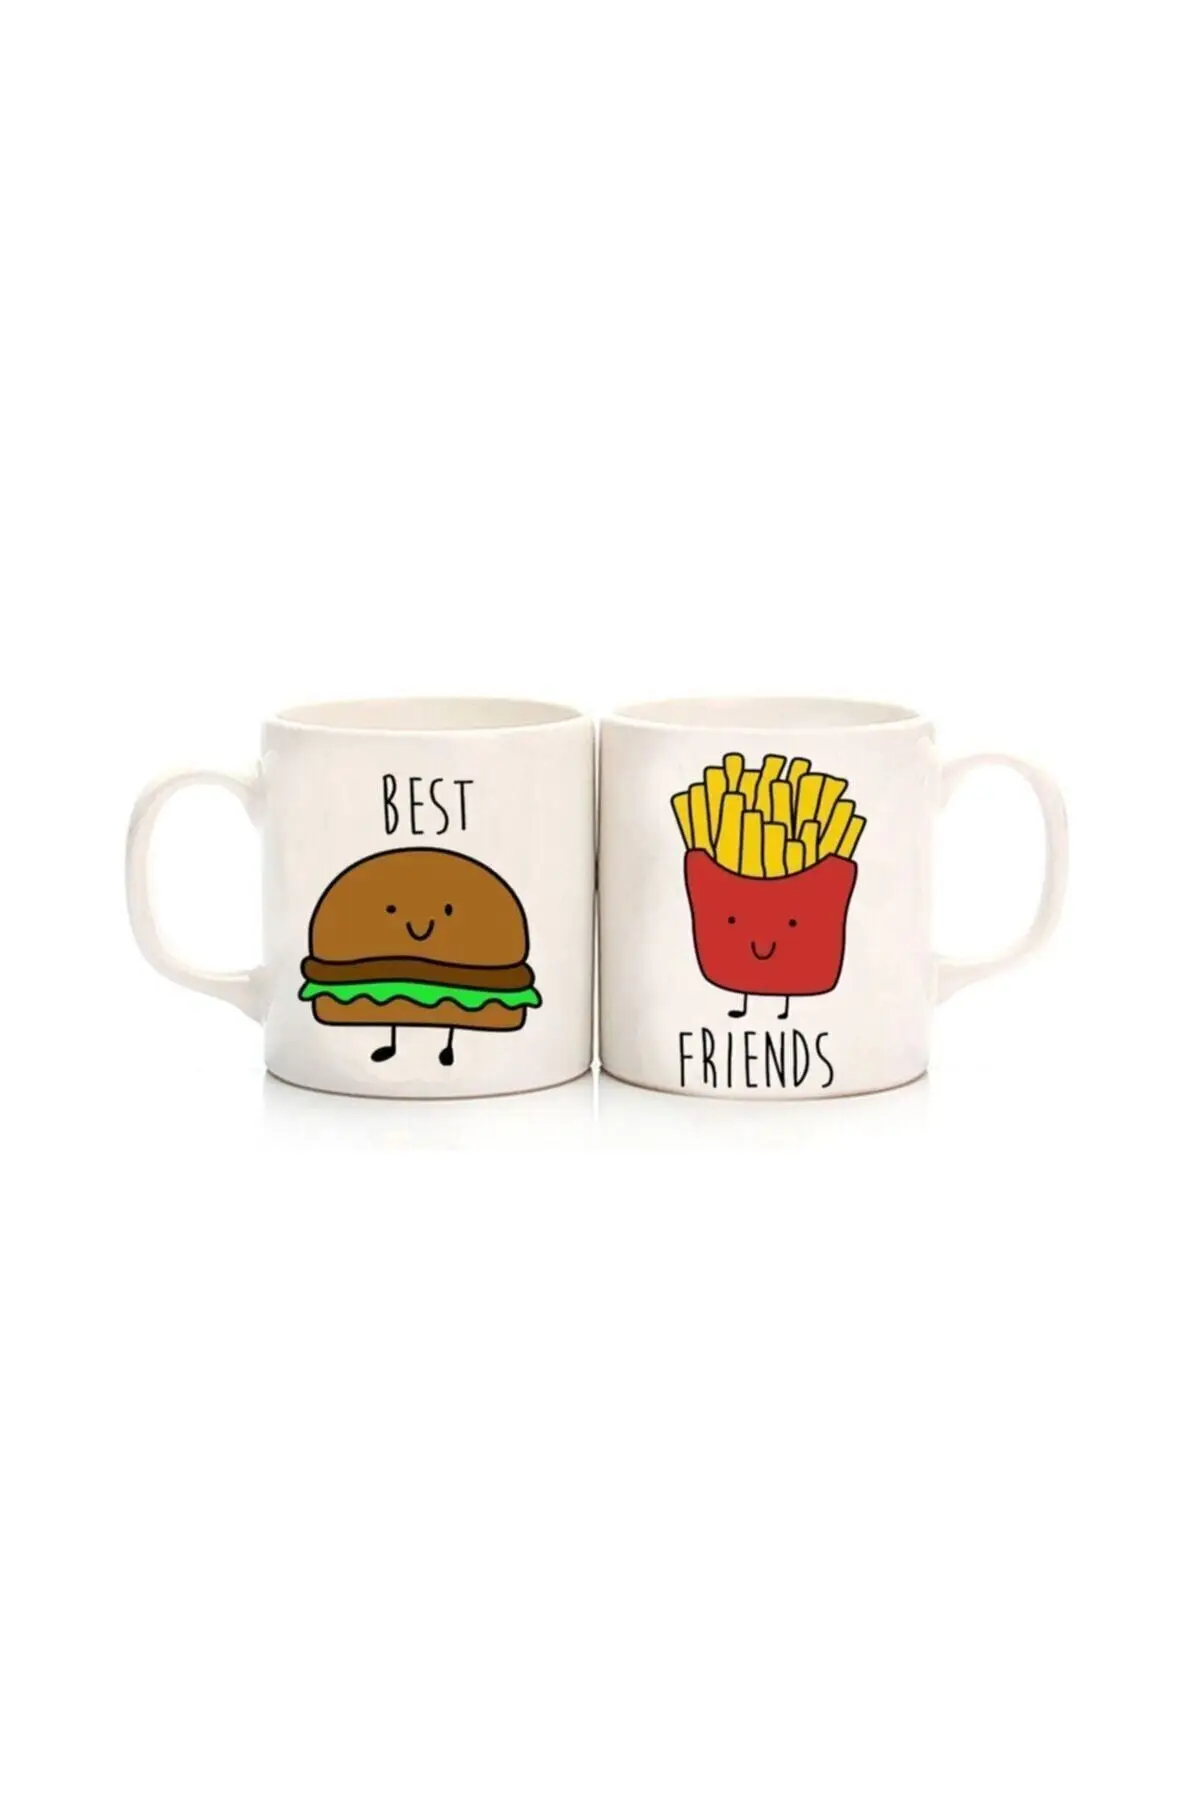 

Hamburger Potato Best Friend Design Cups Porcelain Mugs Products For Tea And Coffee Office And Home Decoration Warm Thermoses